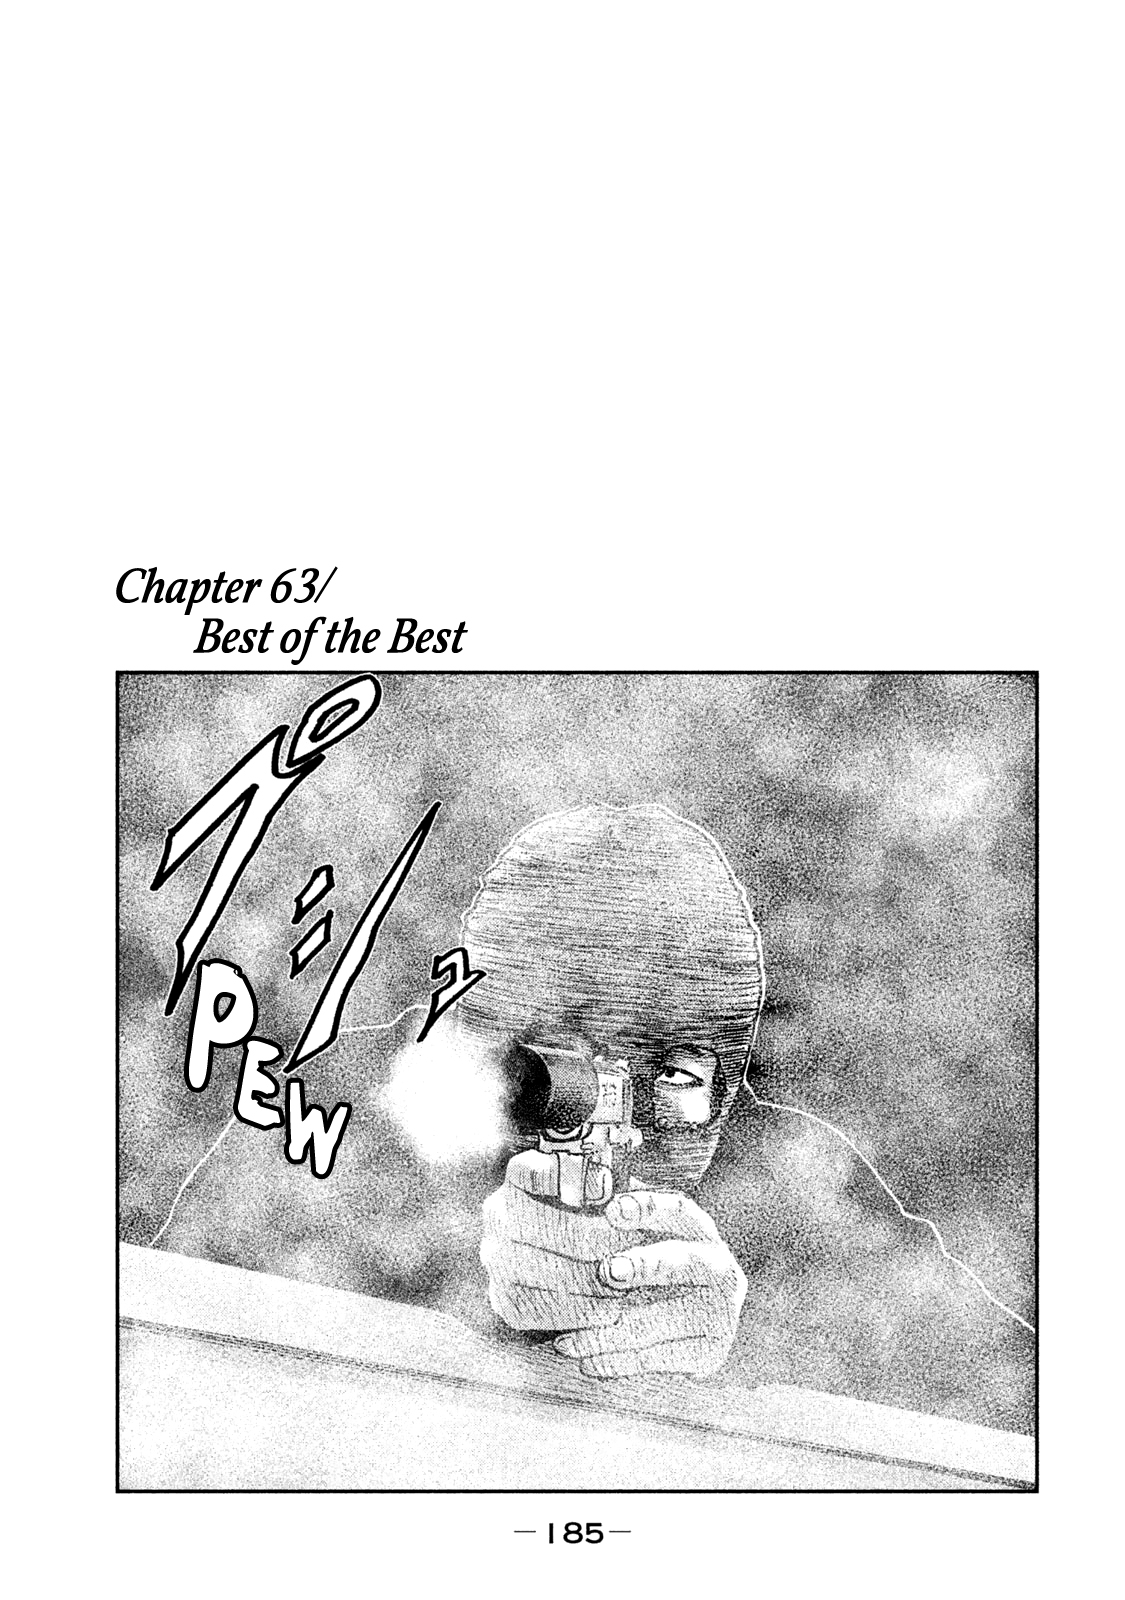 The Fable Vol. 6 Ch. 63 Best of the Best